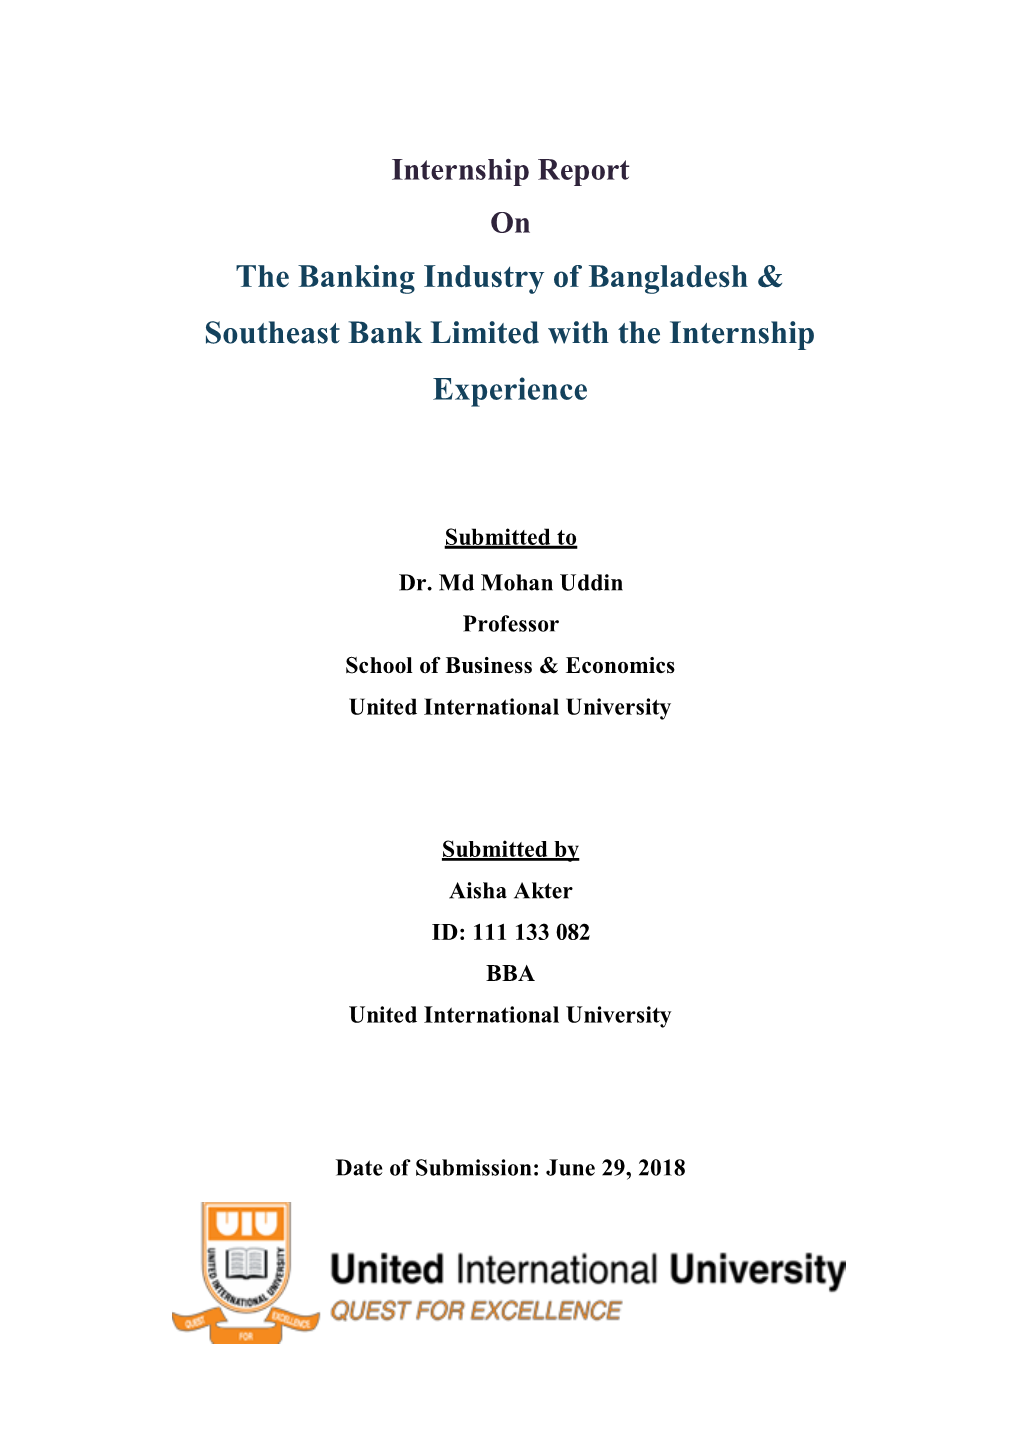 The Banking Industry of Bangladesh & Southeast Bank Limited with The